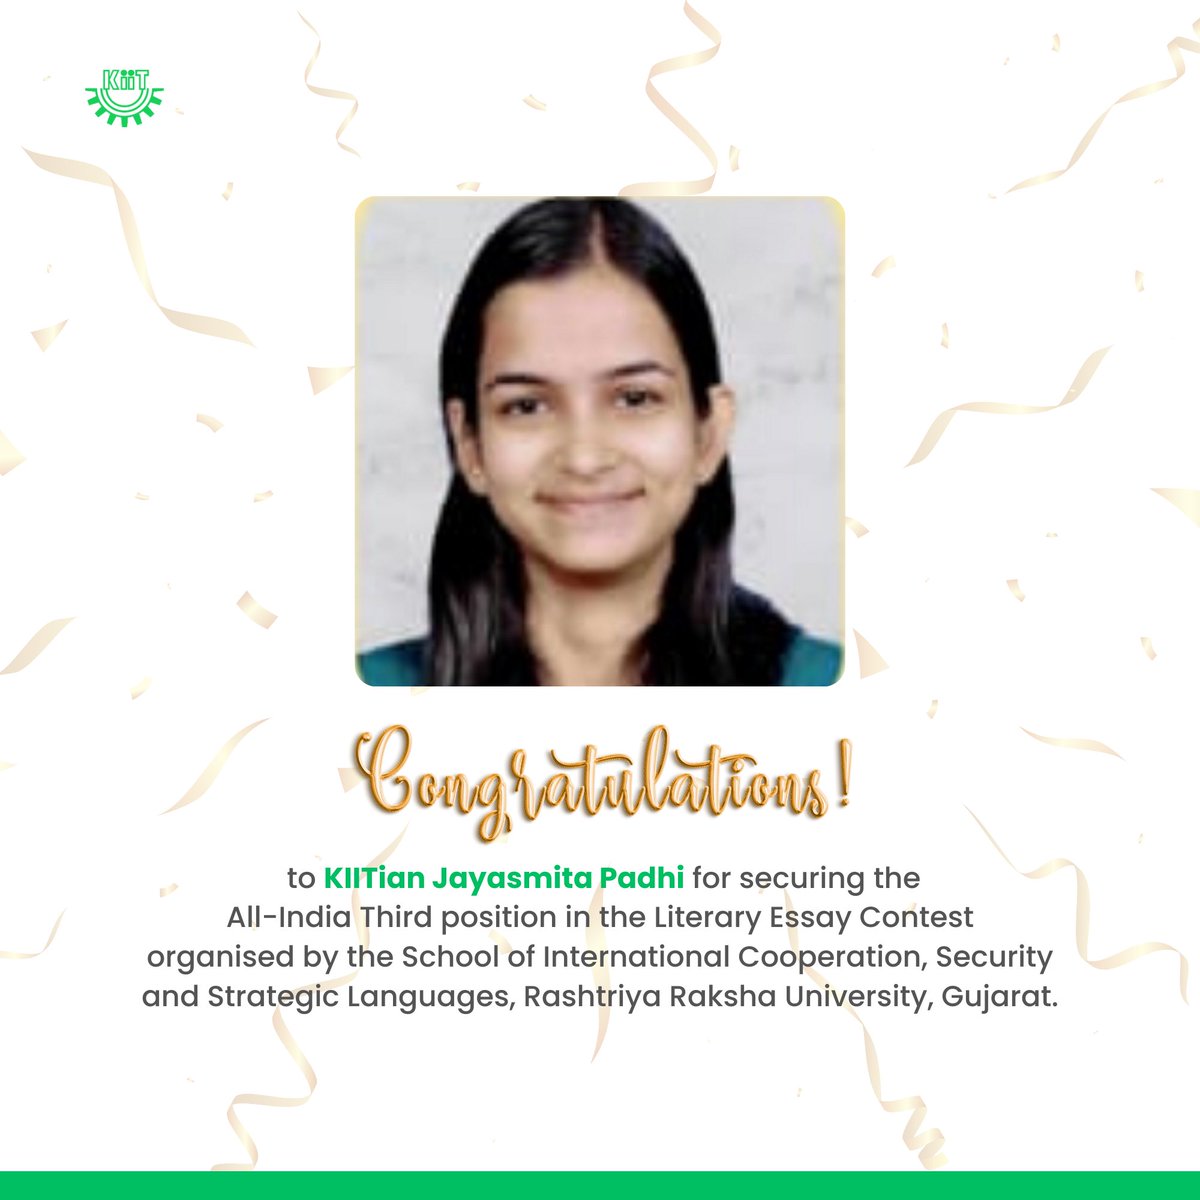 #KIITian Jayasmita Padhi, a B.A. English student at School of Language & Literature secured third place nationally in the “Revisiting Literary Heights” online essay contest hosted by Rashtriya Raksha University, Gujarat. 

Her essay, “A Journey Across Literary Legacies and Modern…